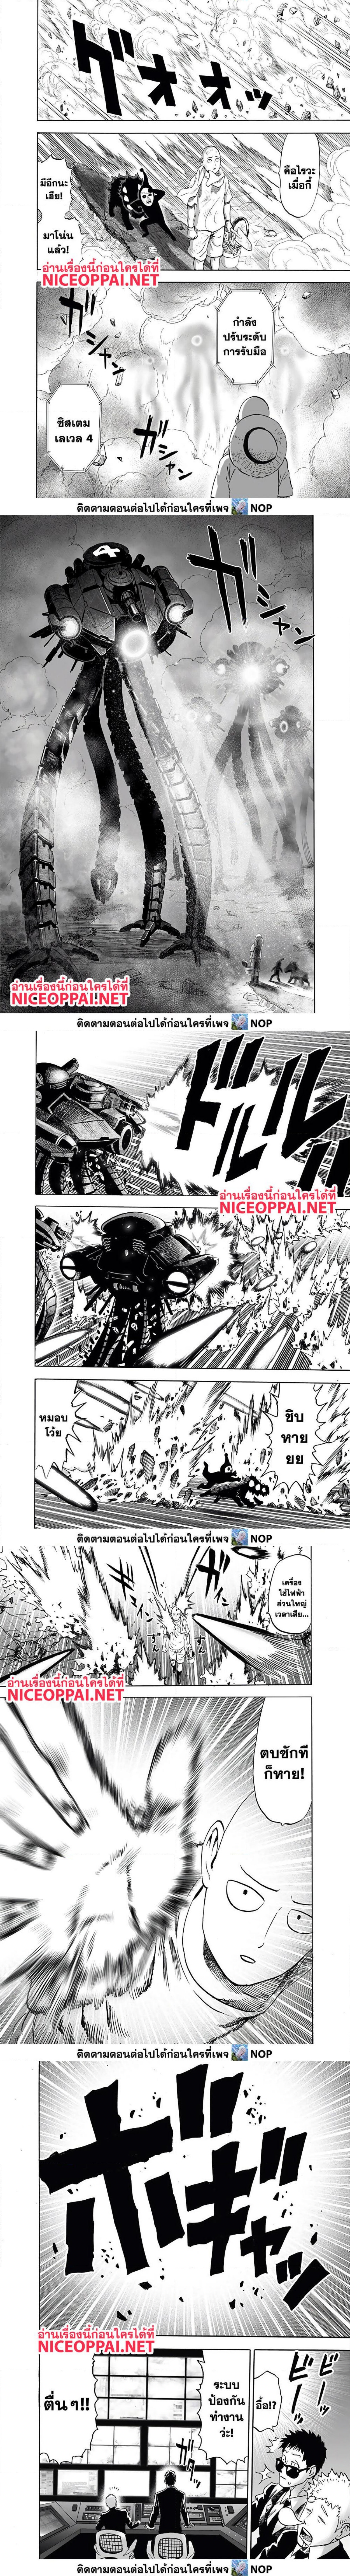 One Punch Man 172 (6)